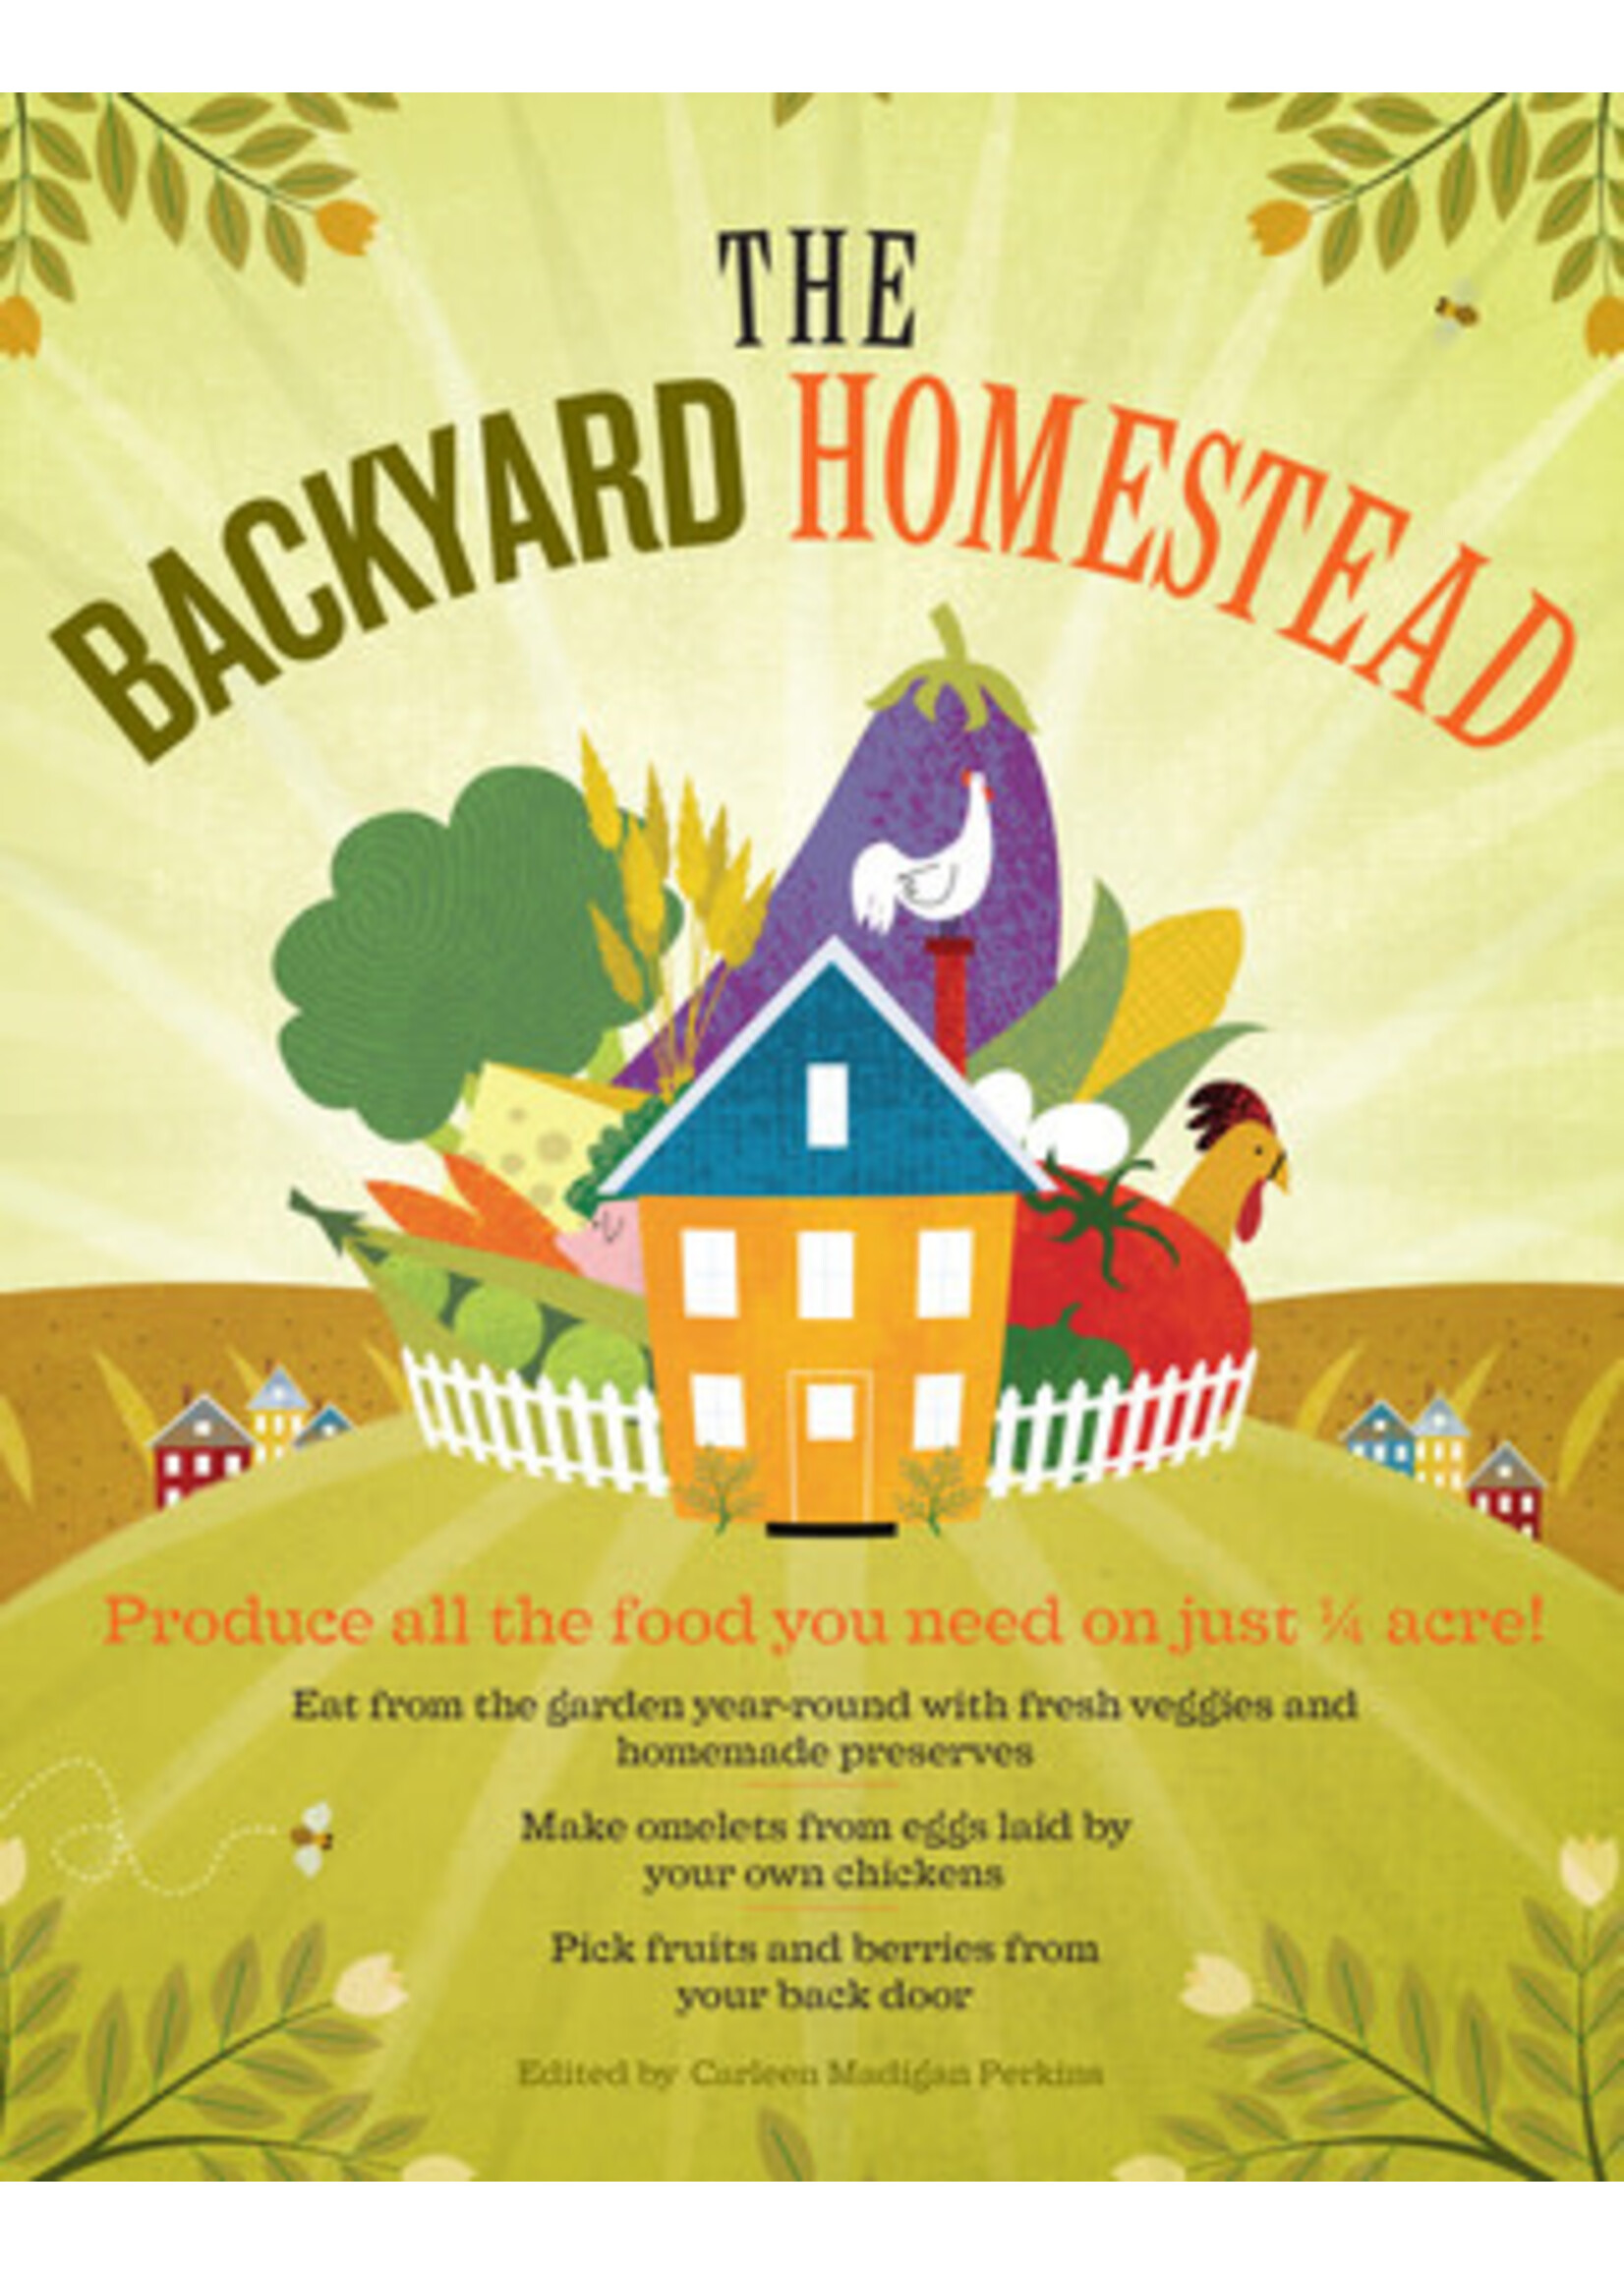 The Backyard Homestead: Produce all the food you need on just a quarter acre! by Carleen Madigan